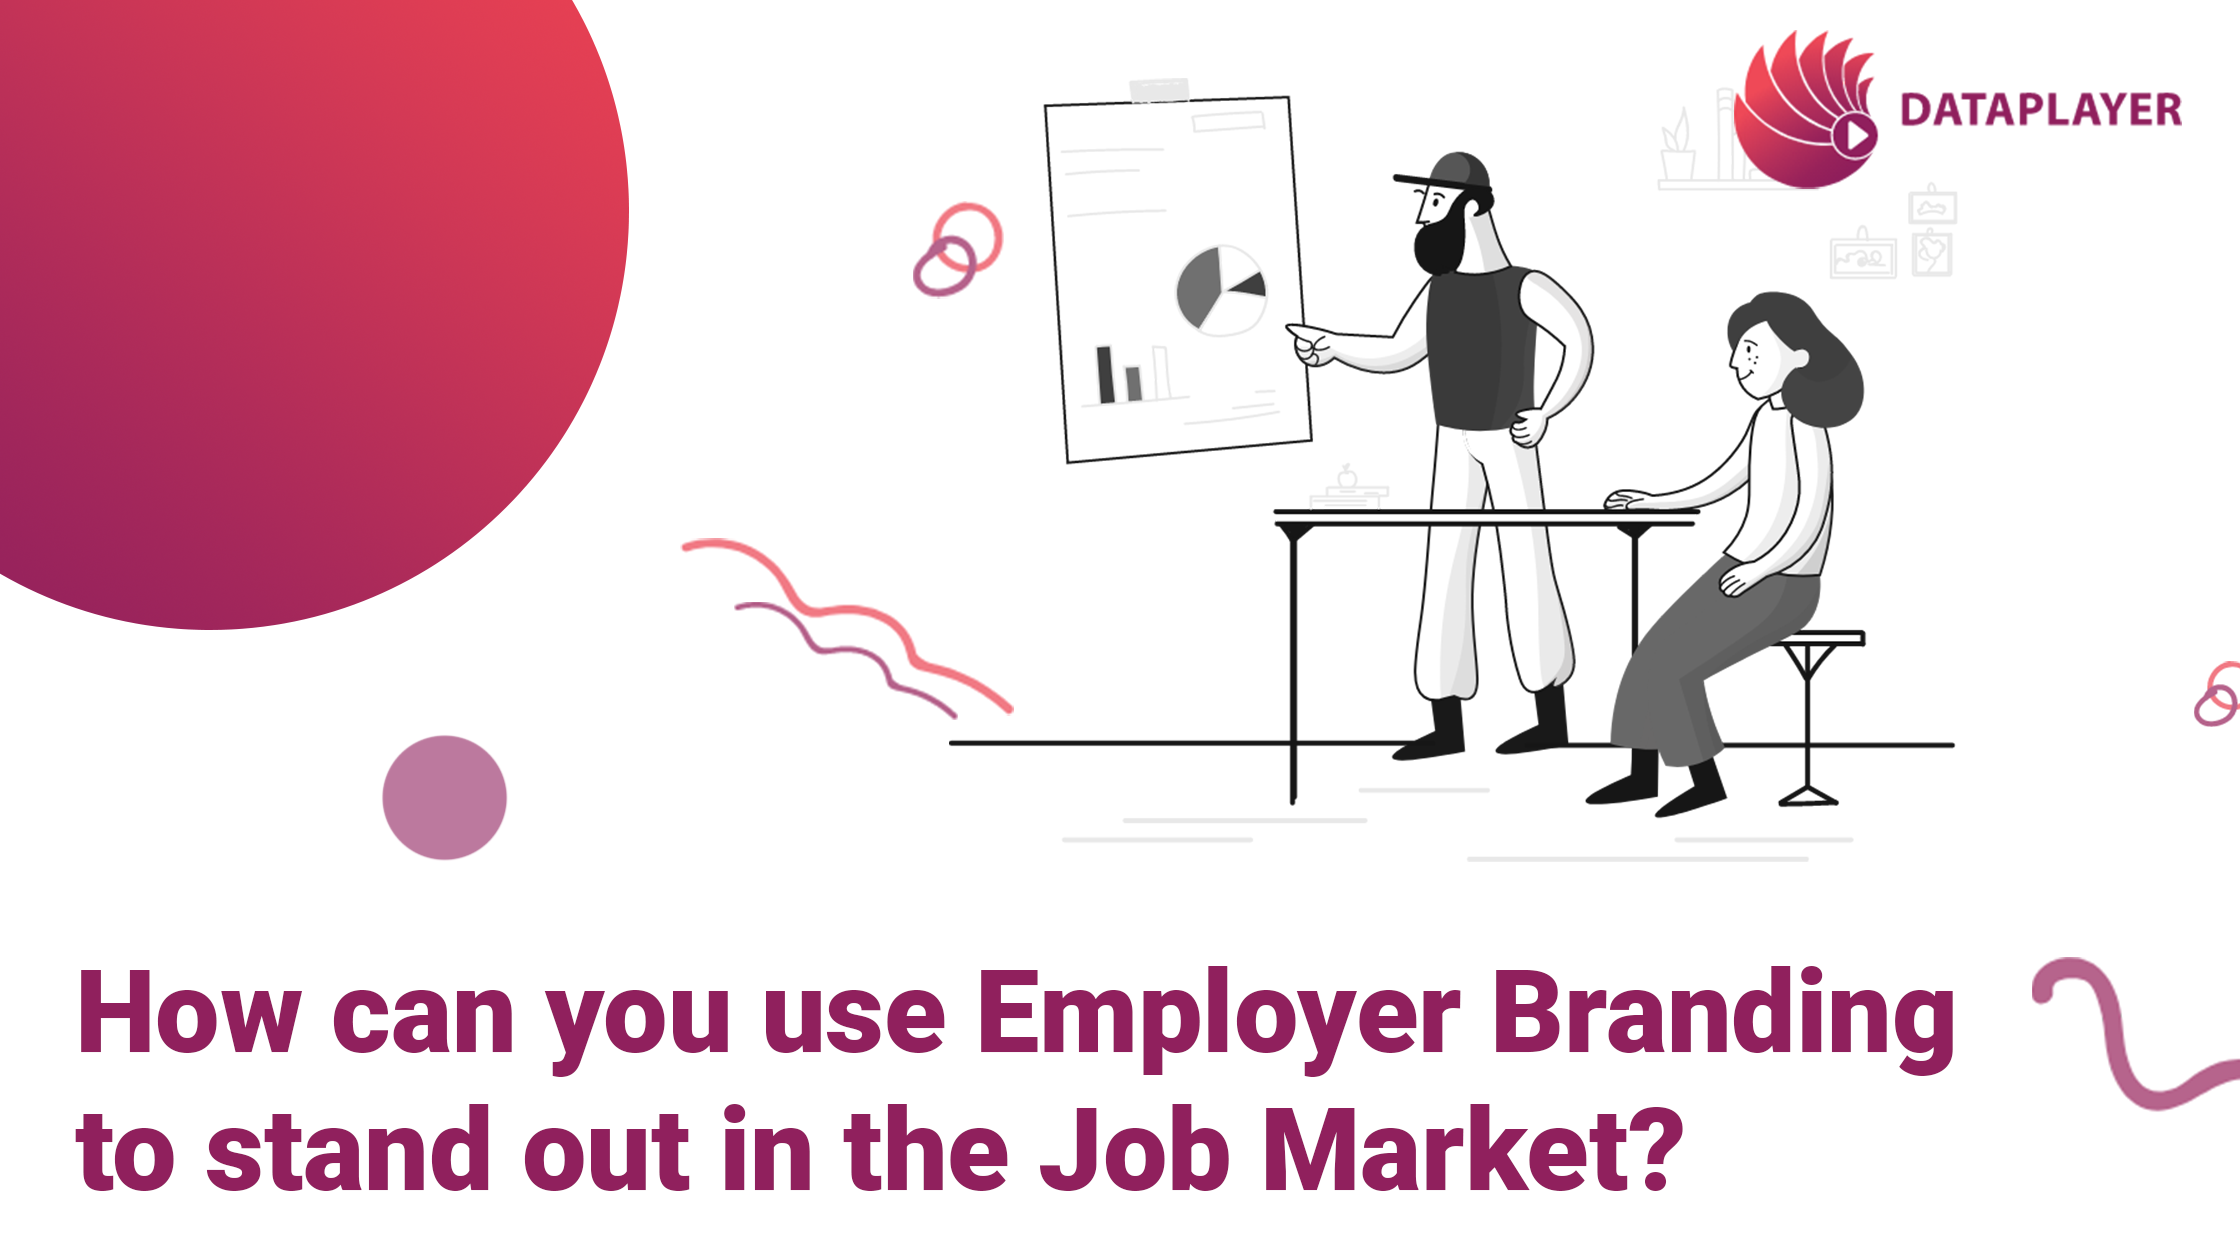 How can you use Employer Branding to stand out in the Job Market?